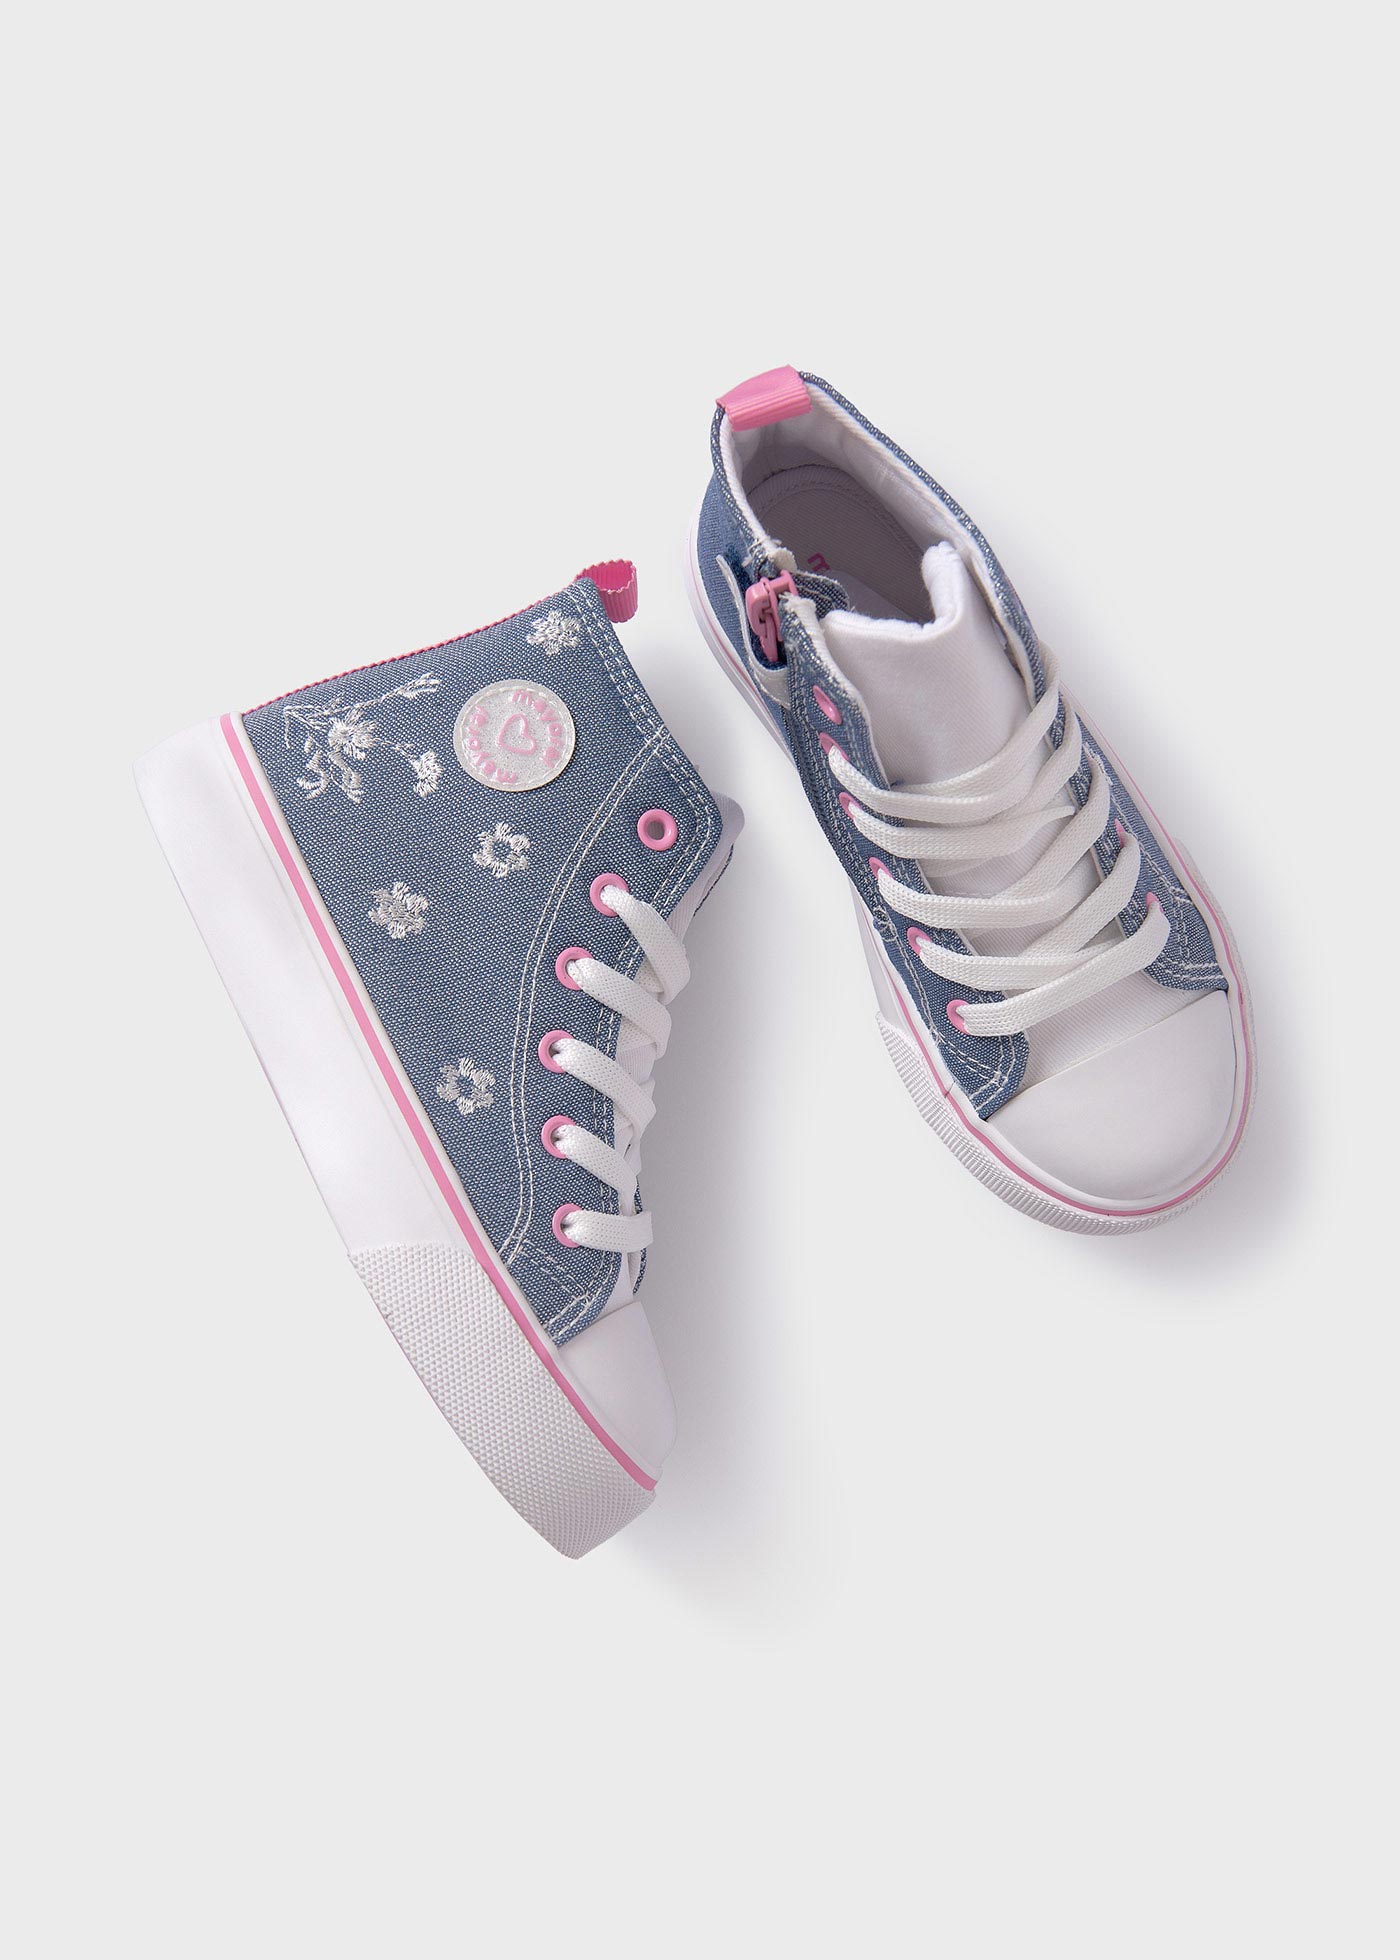 Girls embroidery sneakers